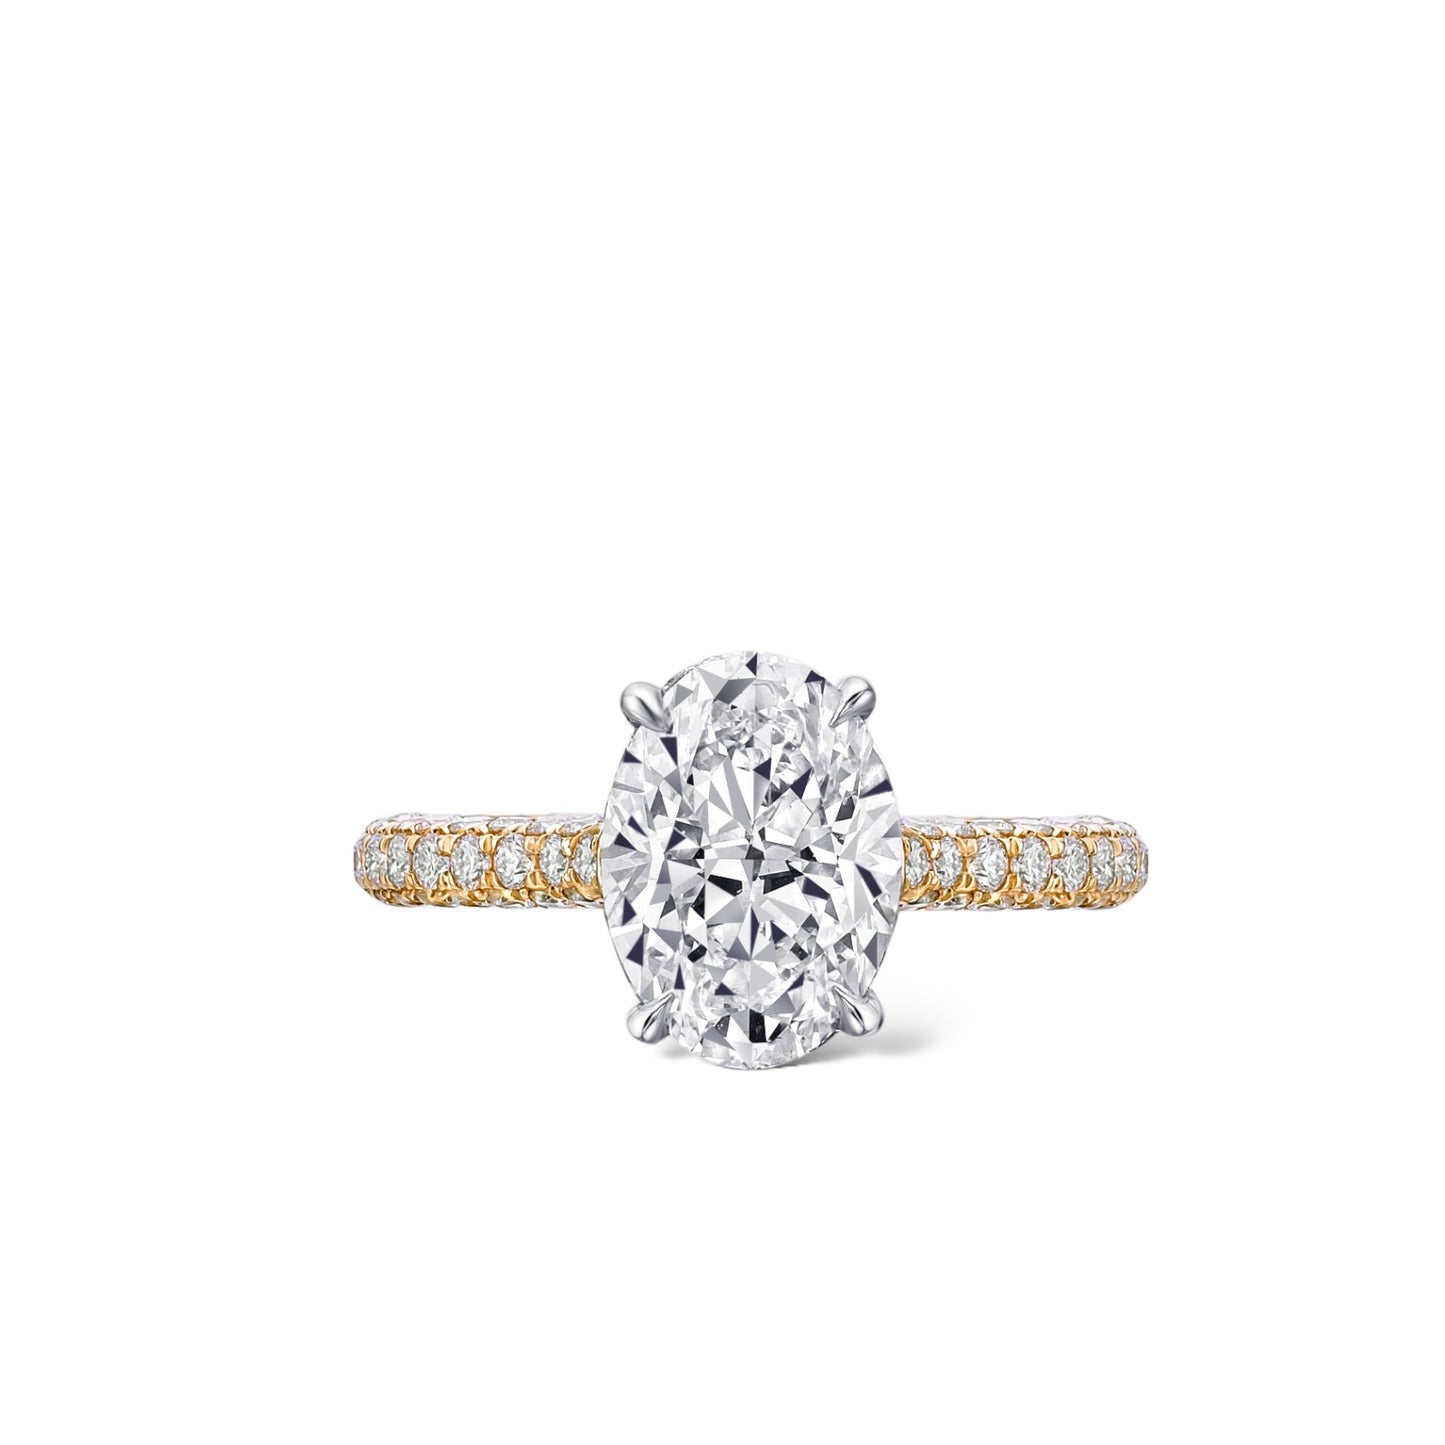 Oval diamond micropave three row ring with hidden halo Hong Kong Australia USA. Micropave diamond engagement ring in 18K gold or platinum. 1.82ct diamond engagement ring. Bespoke fine jewellery by Valentina Fine Jewellery. Two tone diamond engagement ring with platinum and yellow gold.